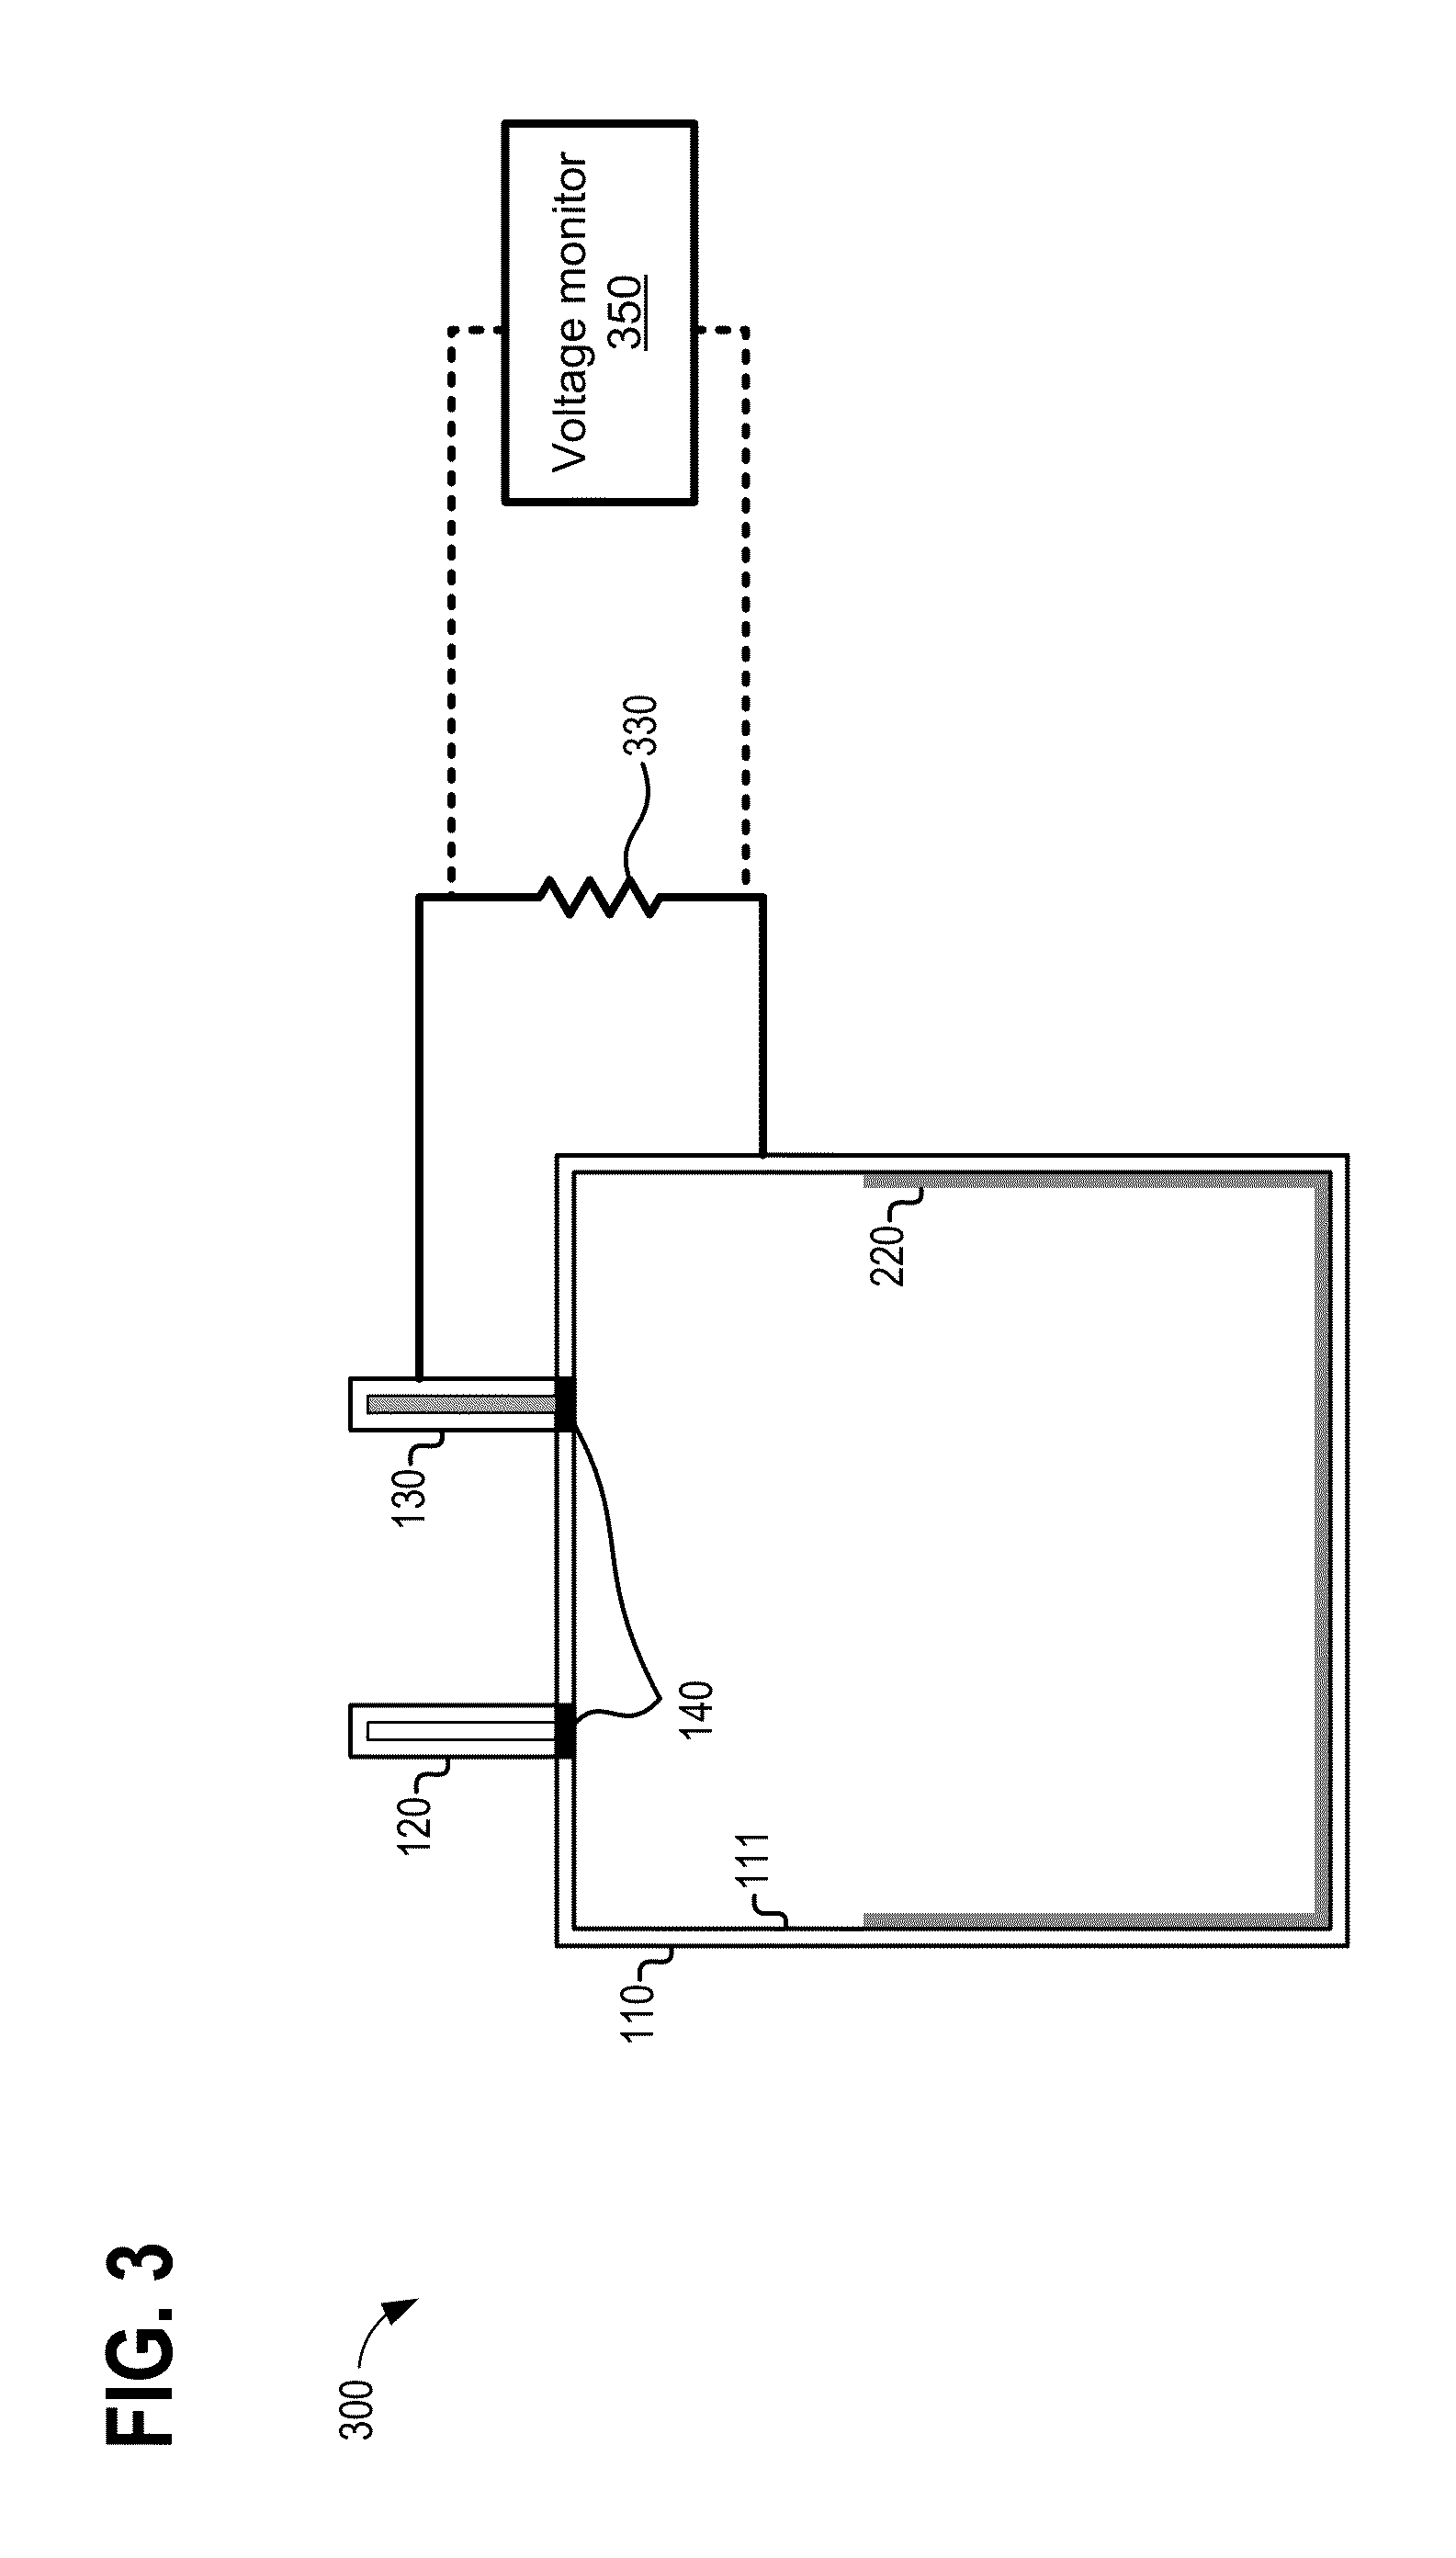 Lithium battery with reference electrode